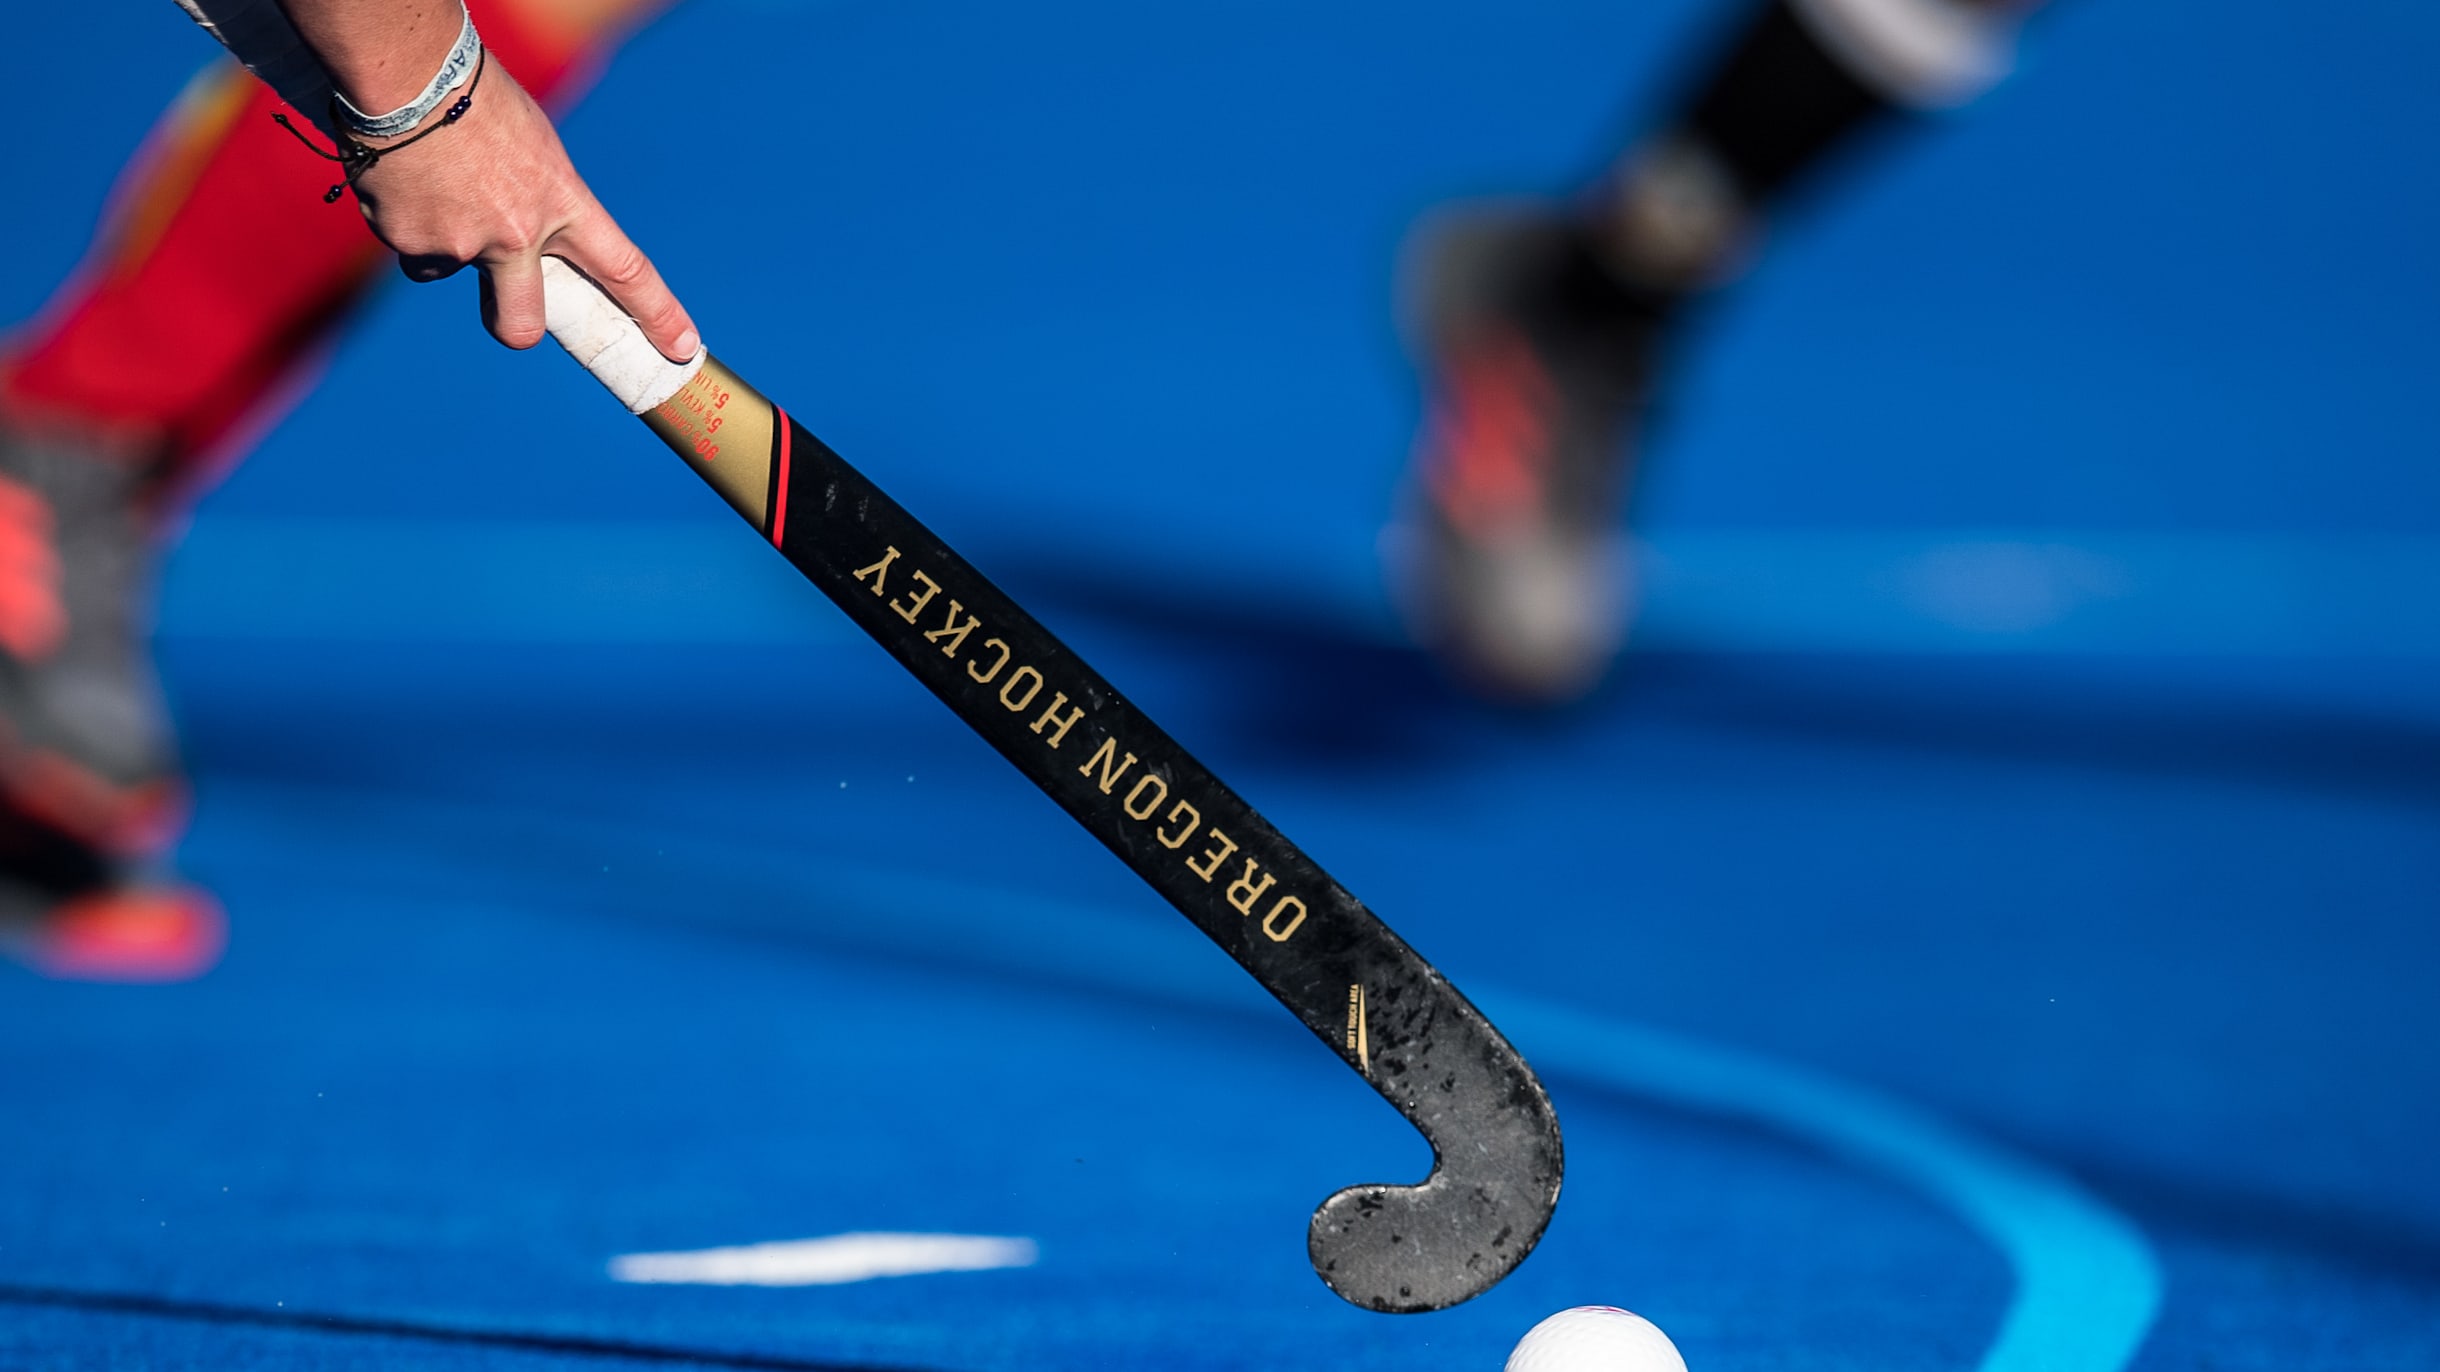 ik ga akkoord met beproeving doen alsof Hockey stick: Know the size, weight and materials used